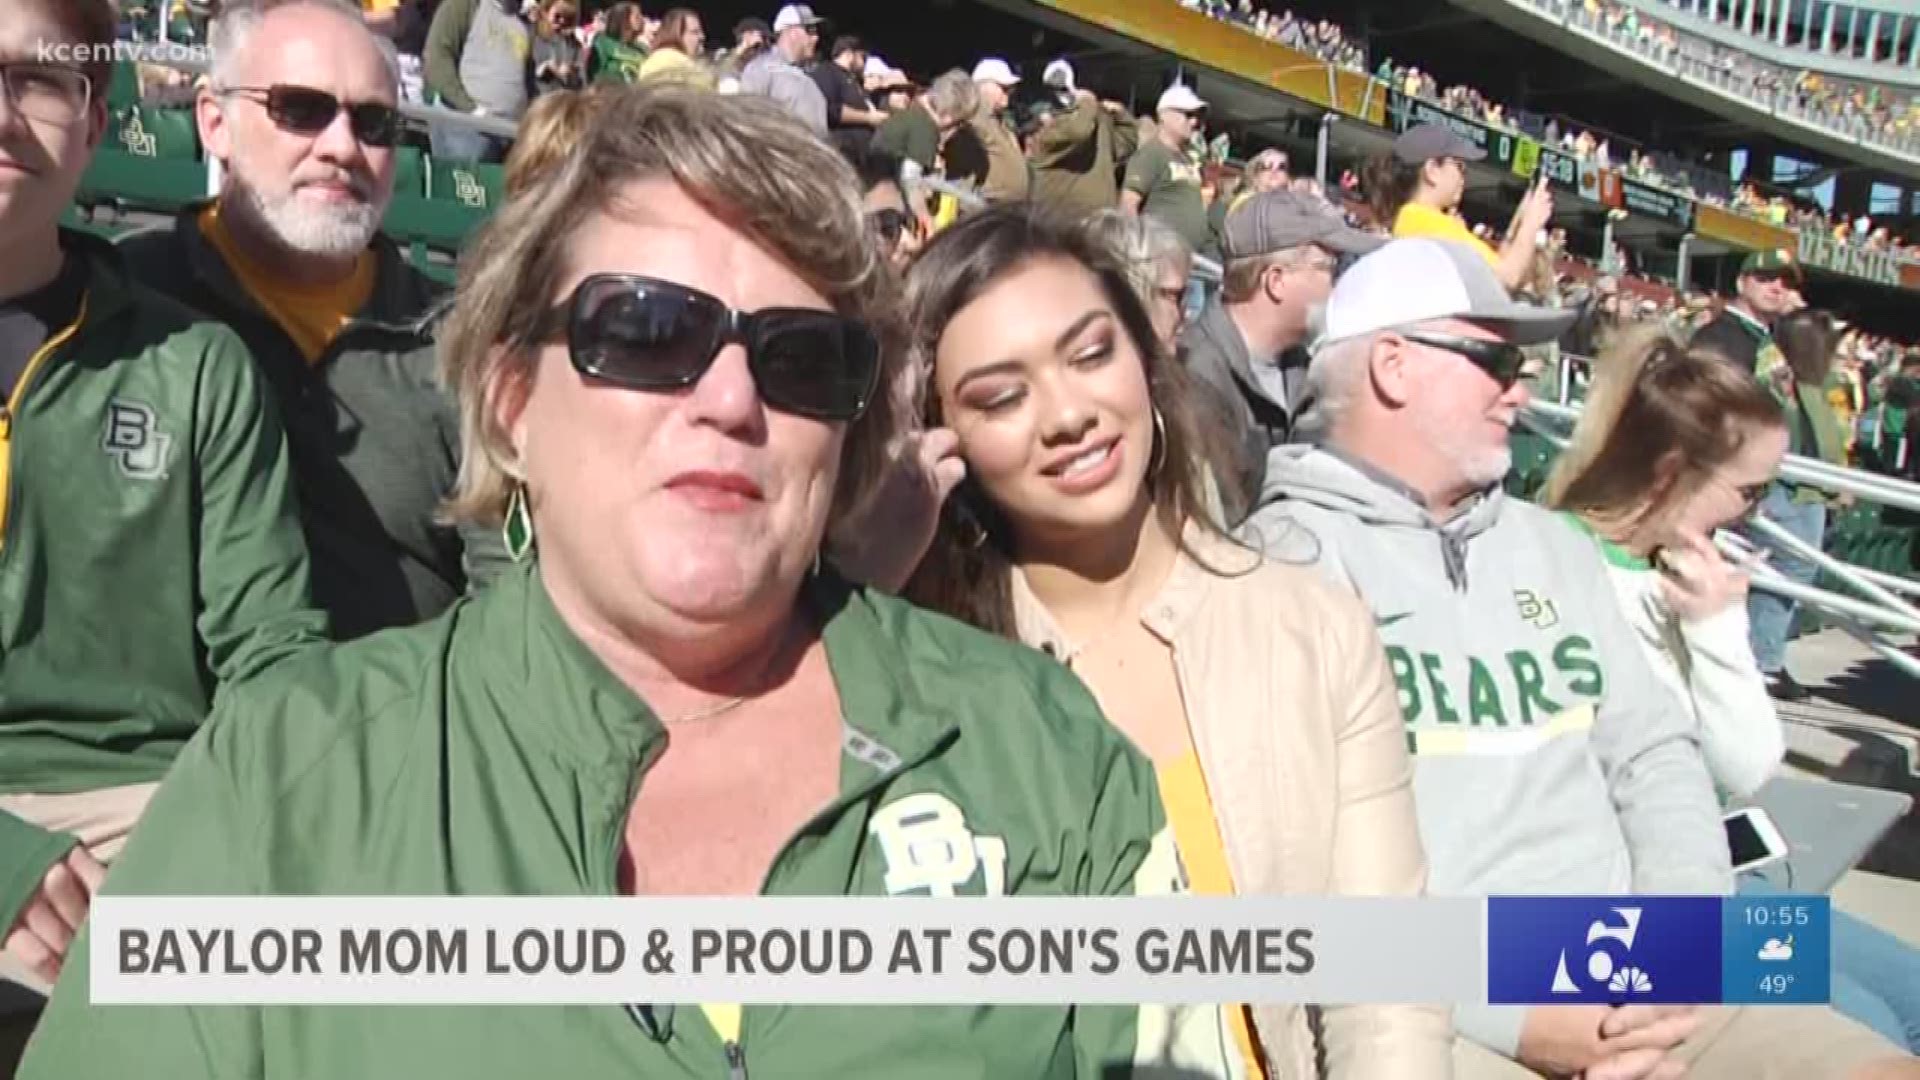 Jessica Morrey hears from one of Baylor's loudest fans.